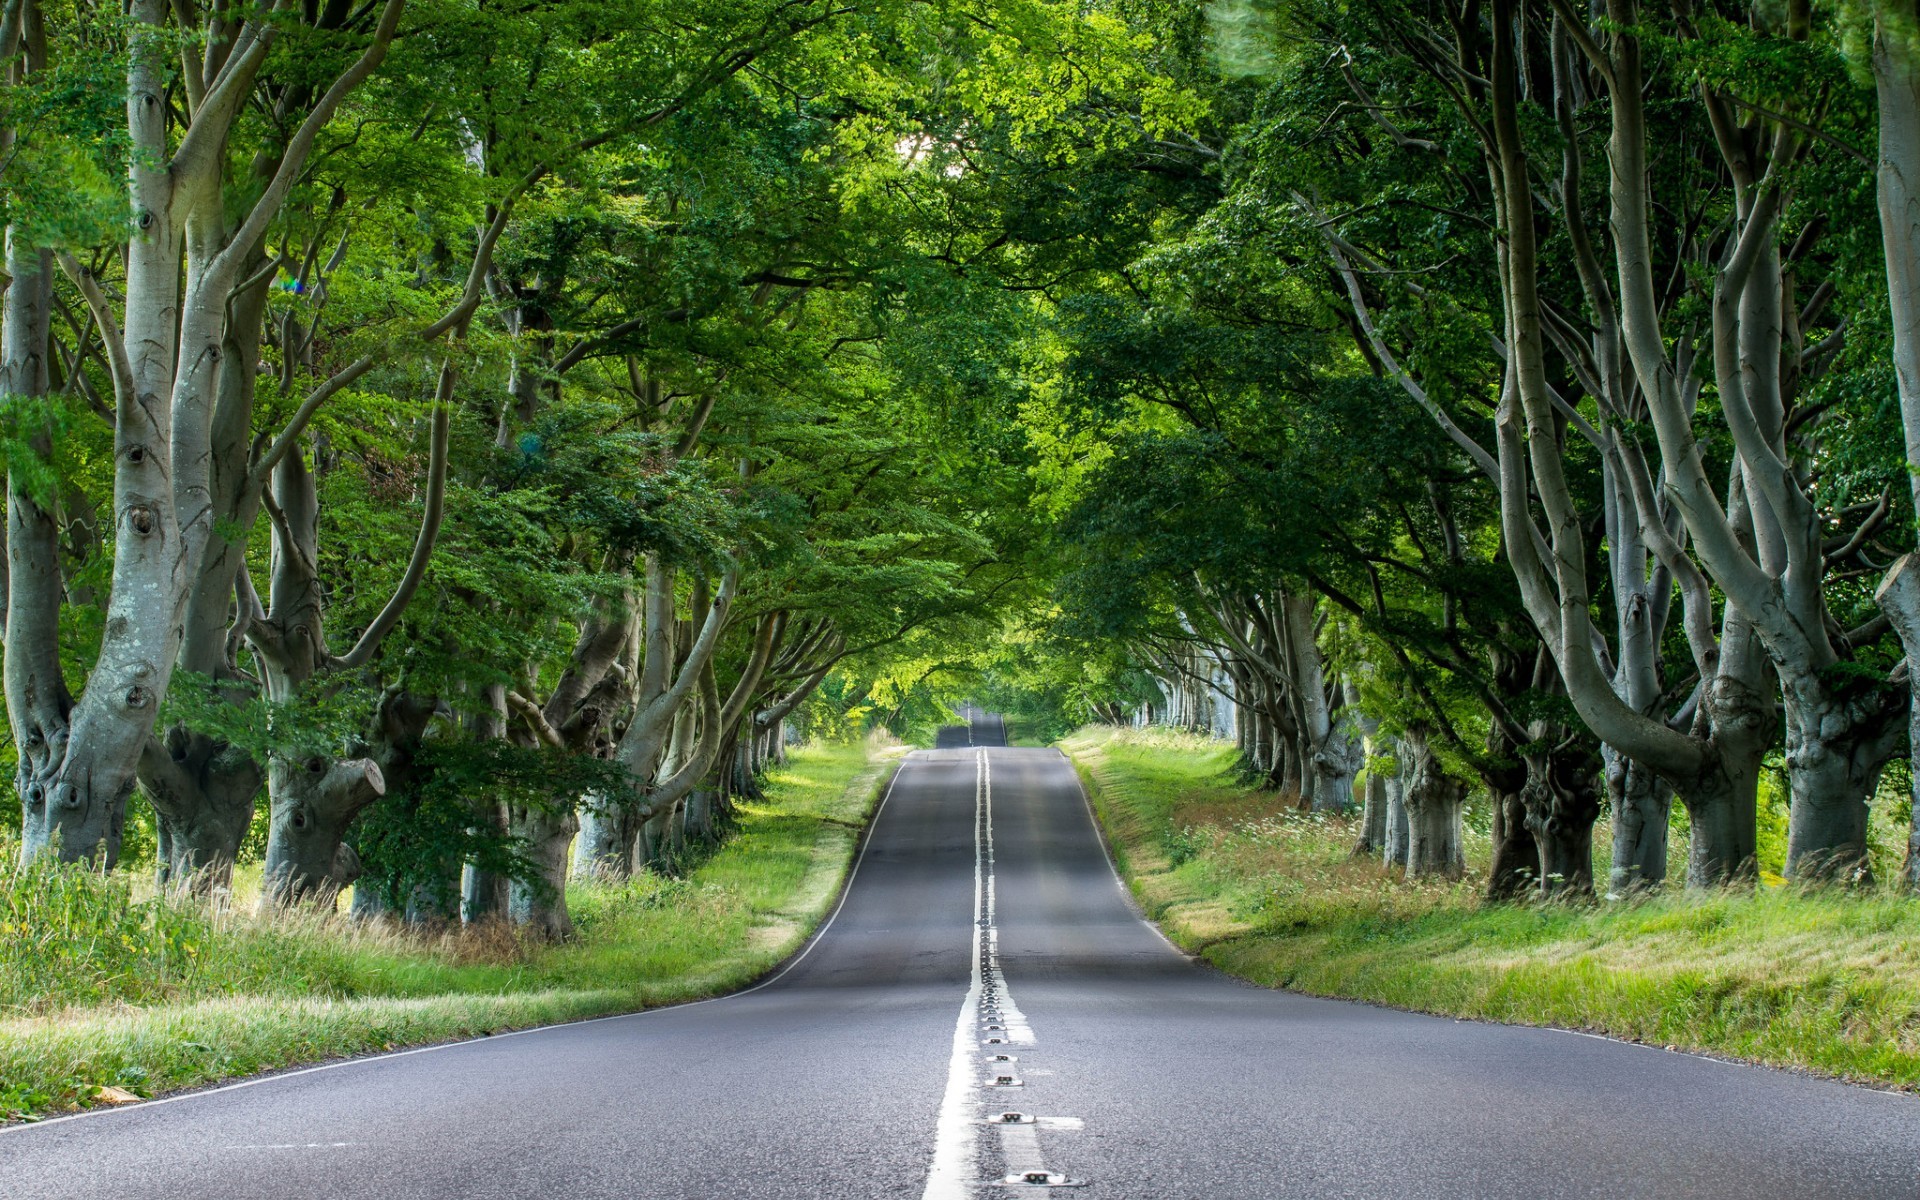 road-through-the-forest-nature-hd-wallpaper-1920x1200-34861.jpg